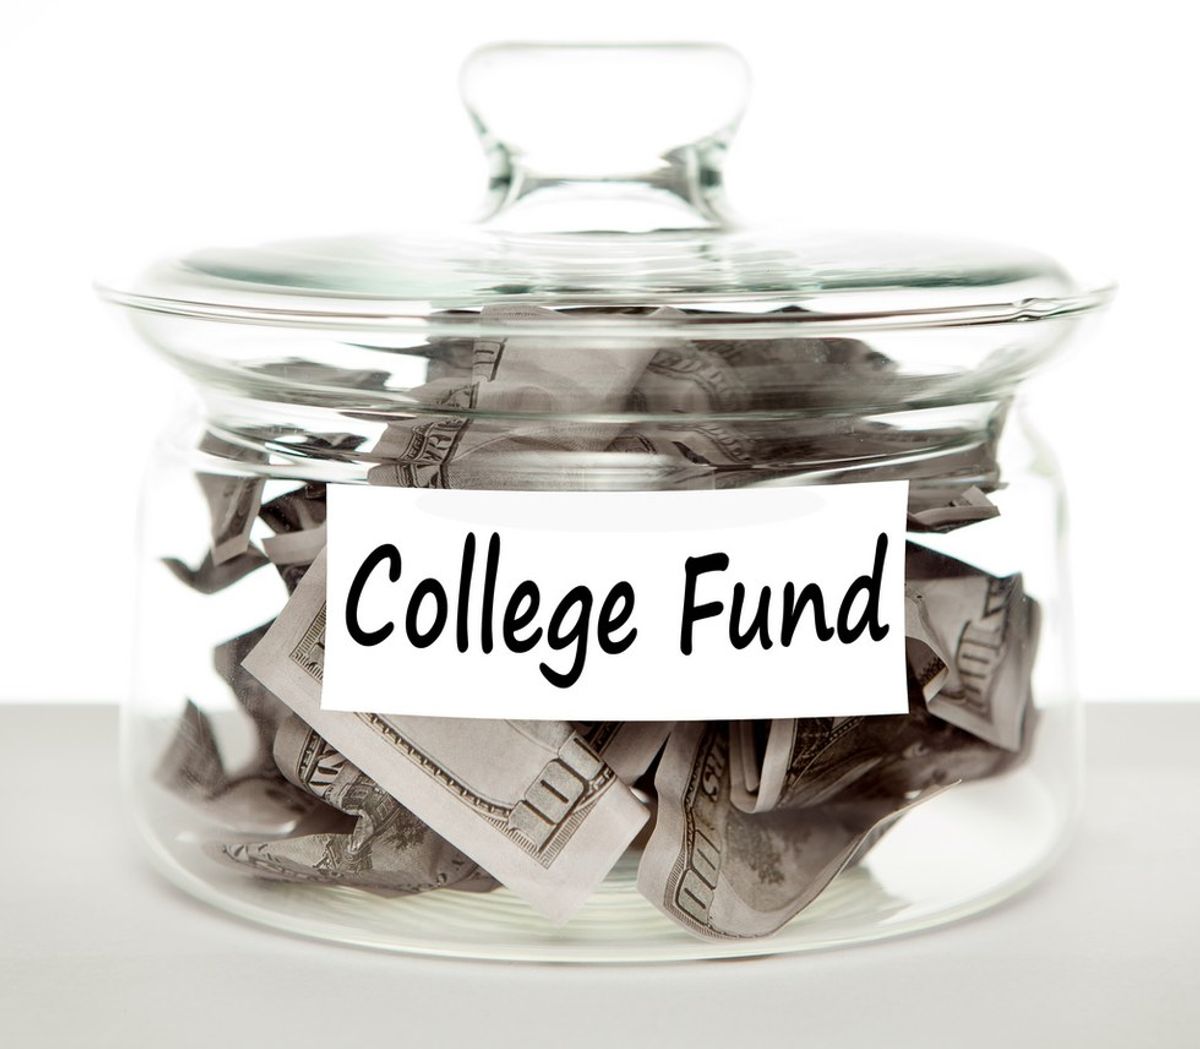 Do Not Cut Federal Grants for Low-Income Students to Attend College